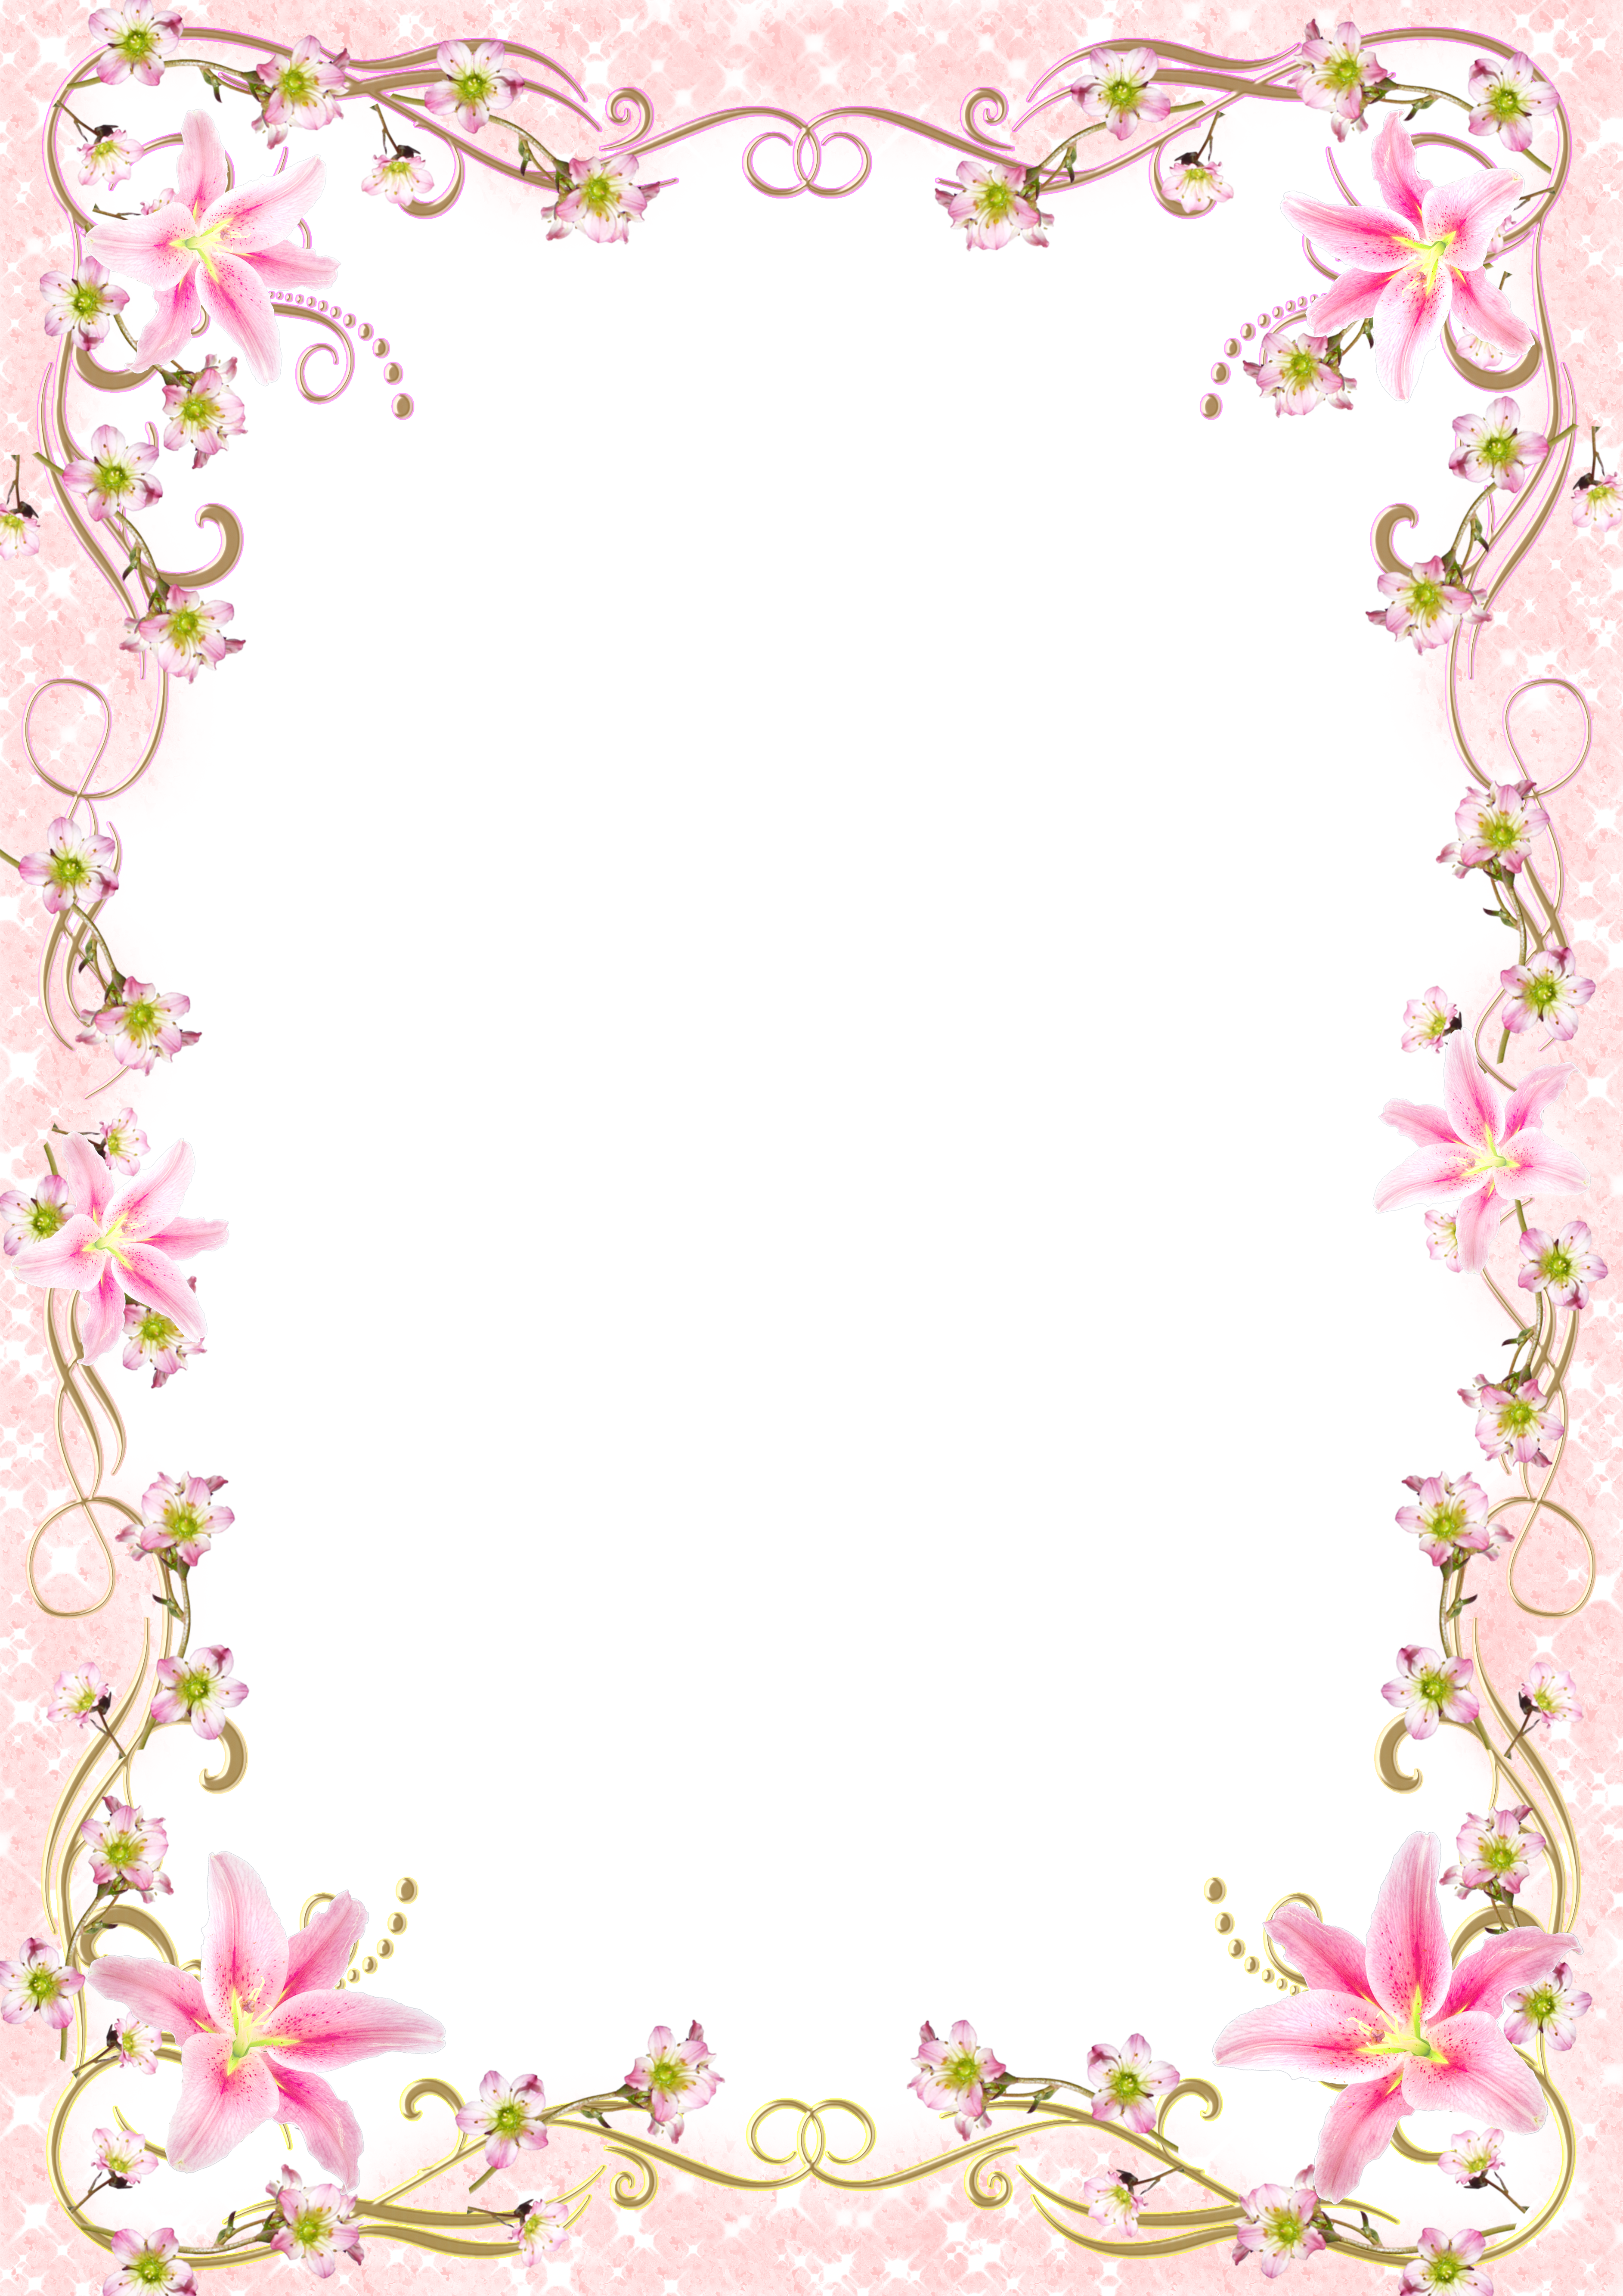 Clipart flower border line. Download picture frame template